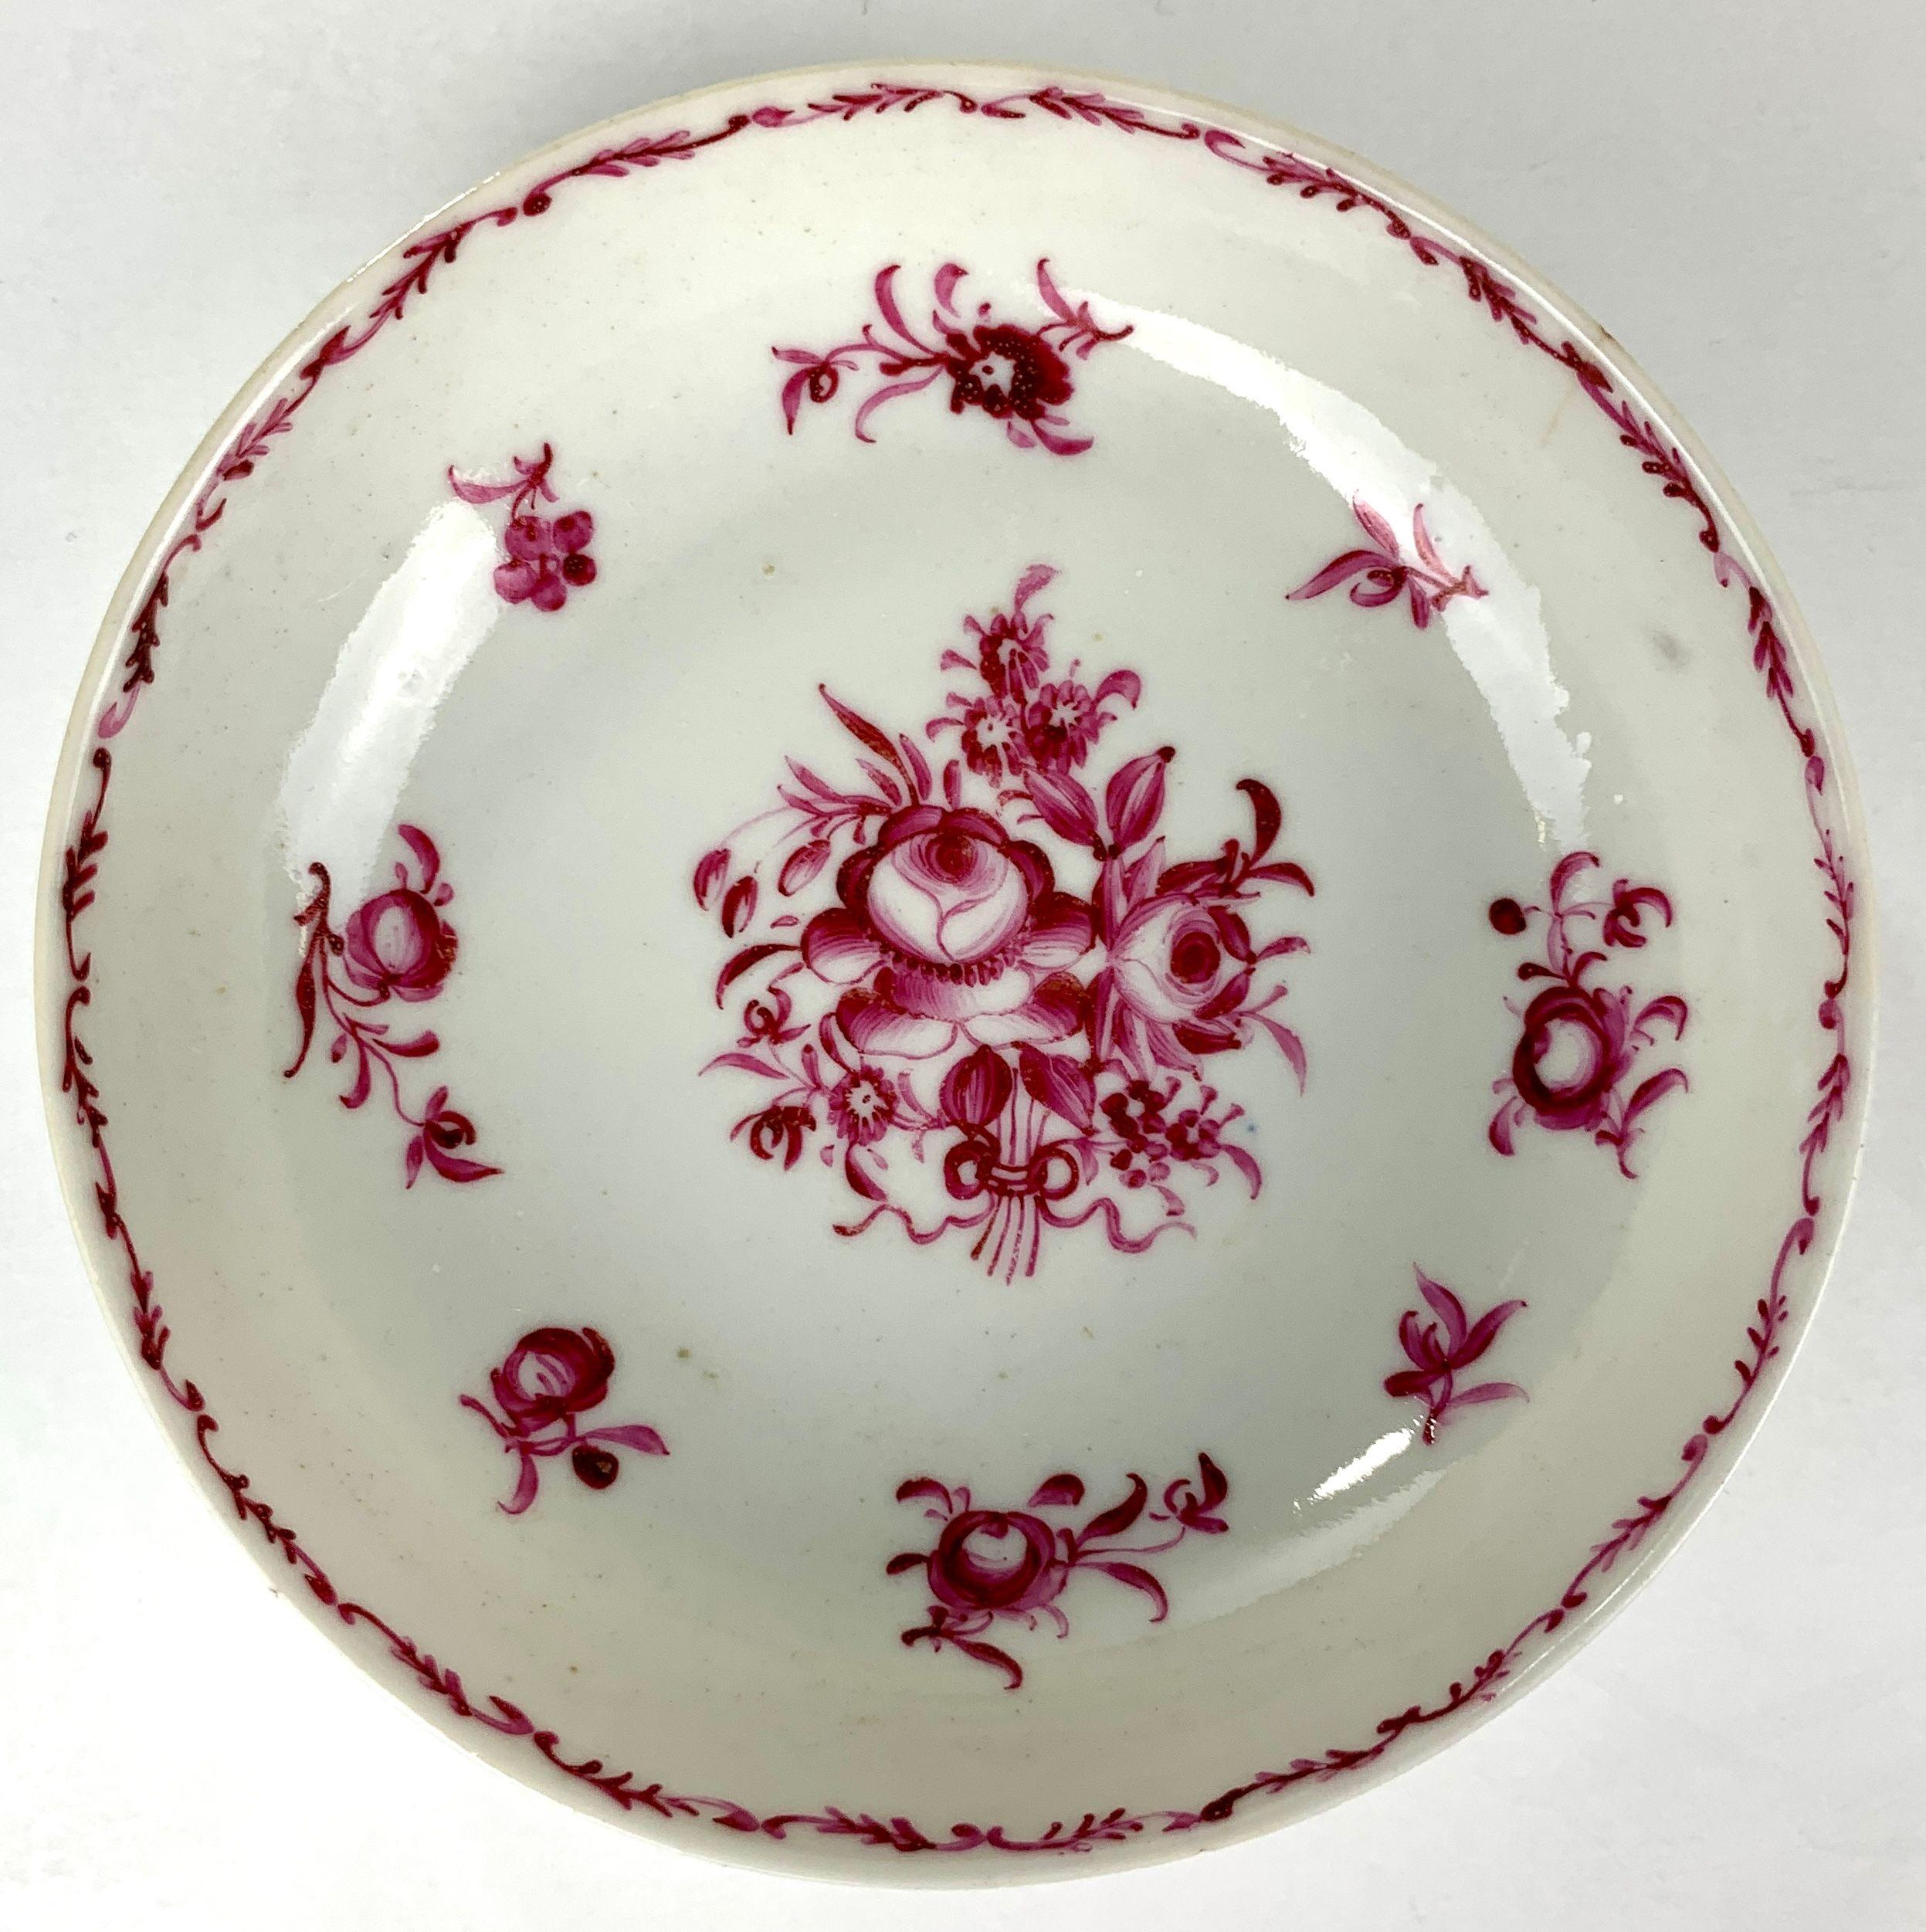 This set of antique Chinese porcelain saucers features beautiful peonies hand-painted in monochrome purple.
Peonies symbolize prosperity, good luck, love, and honor in Chinese tradition. The color purple symbolizes love and spiritual awareness.
The